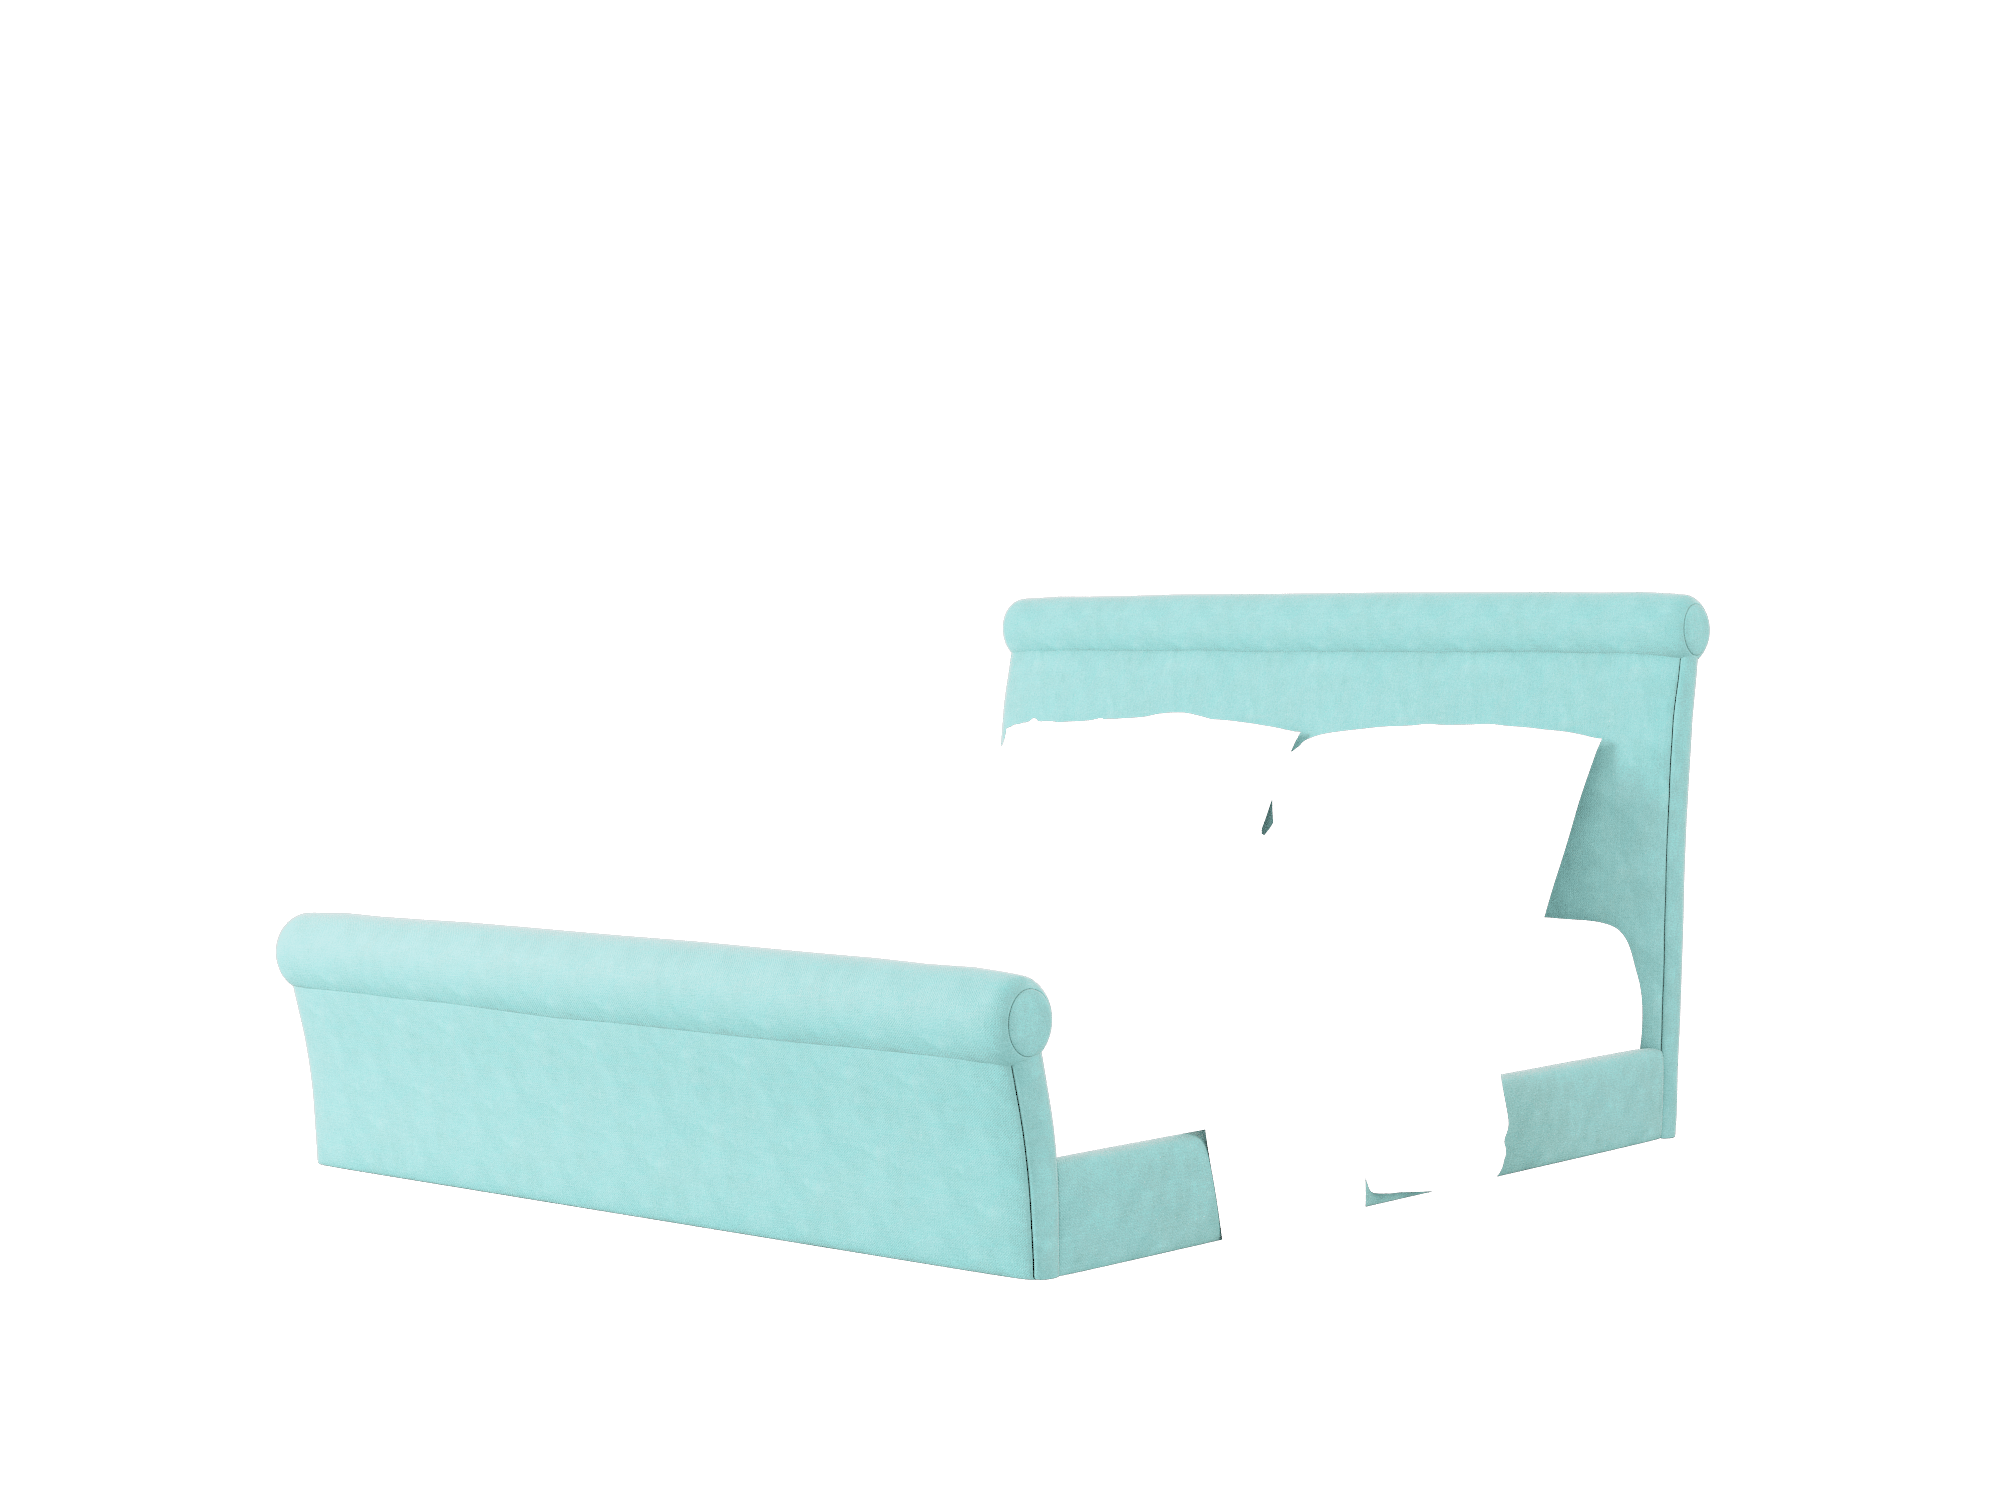 Maja Curious Turquoise Bed King Room Texture